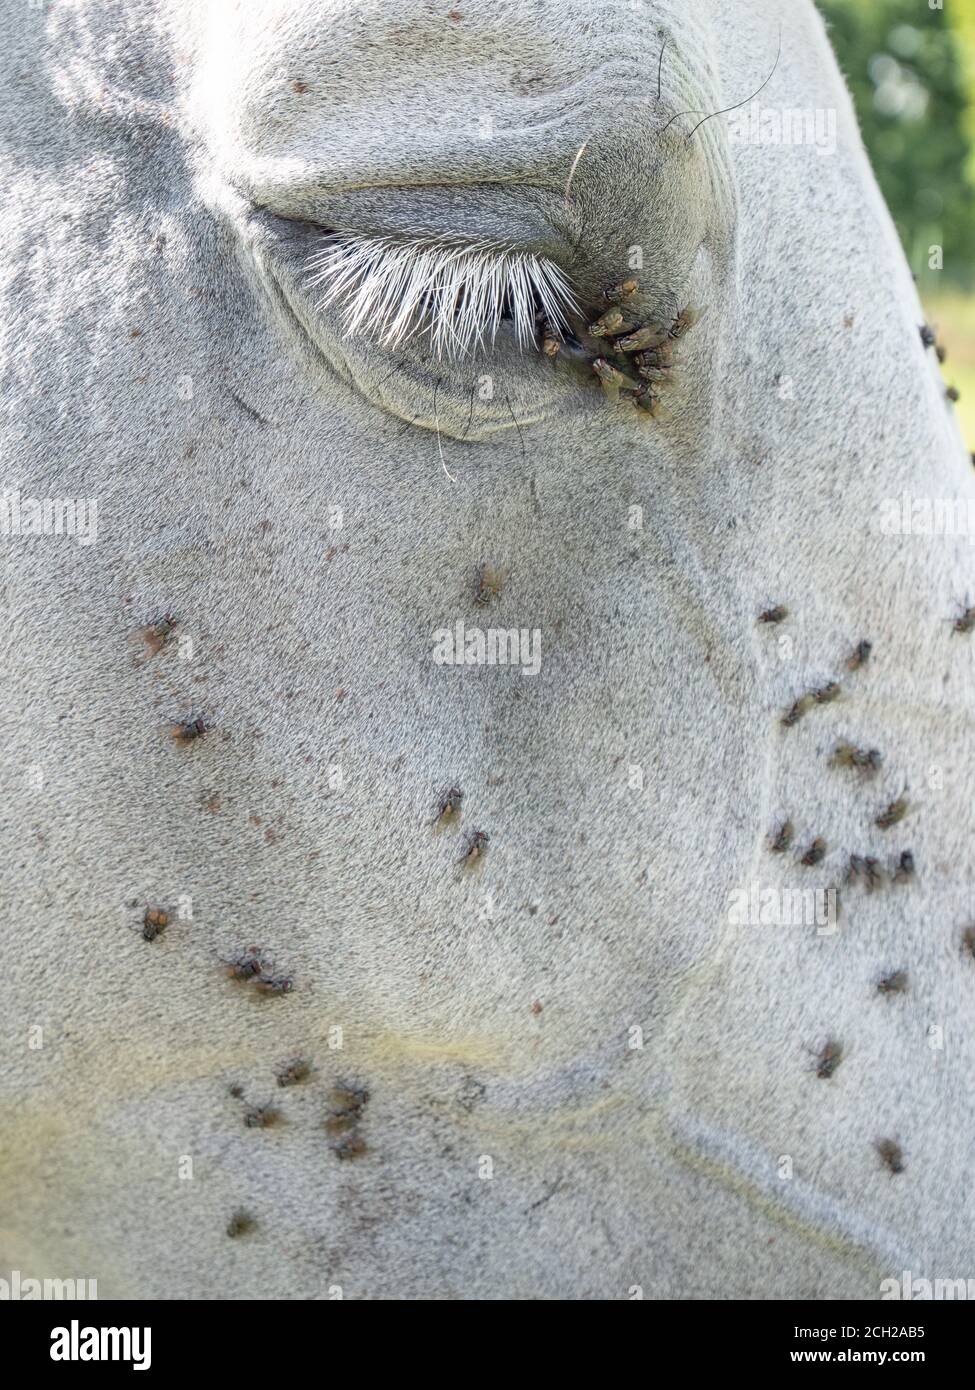 Horse eye and mouth with anoying small flies. Insects on animal head. Stock Photo